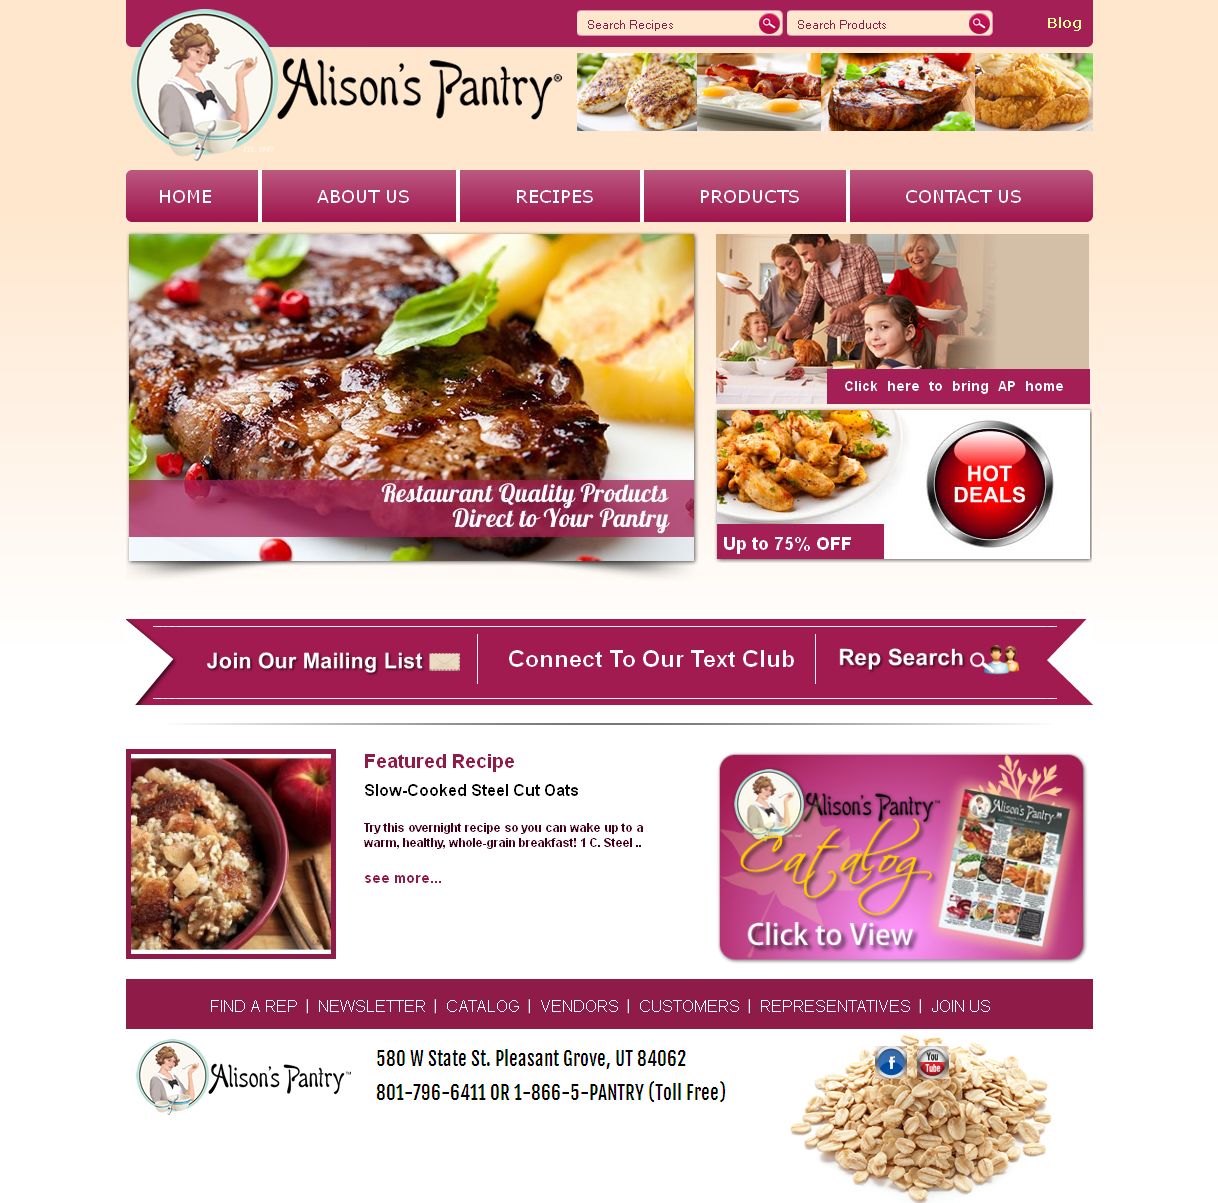 A Magento Based eCommerce Website for Food Products- Portfolio SynapseIndia